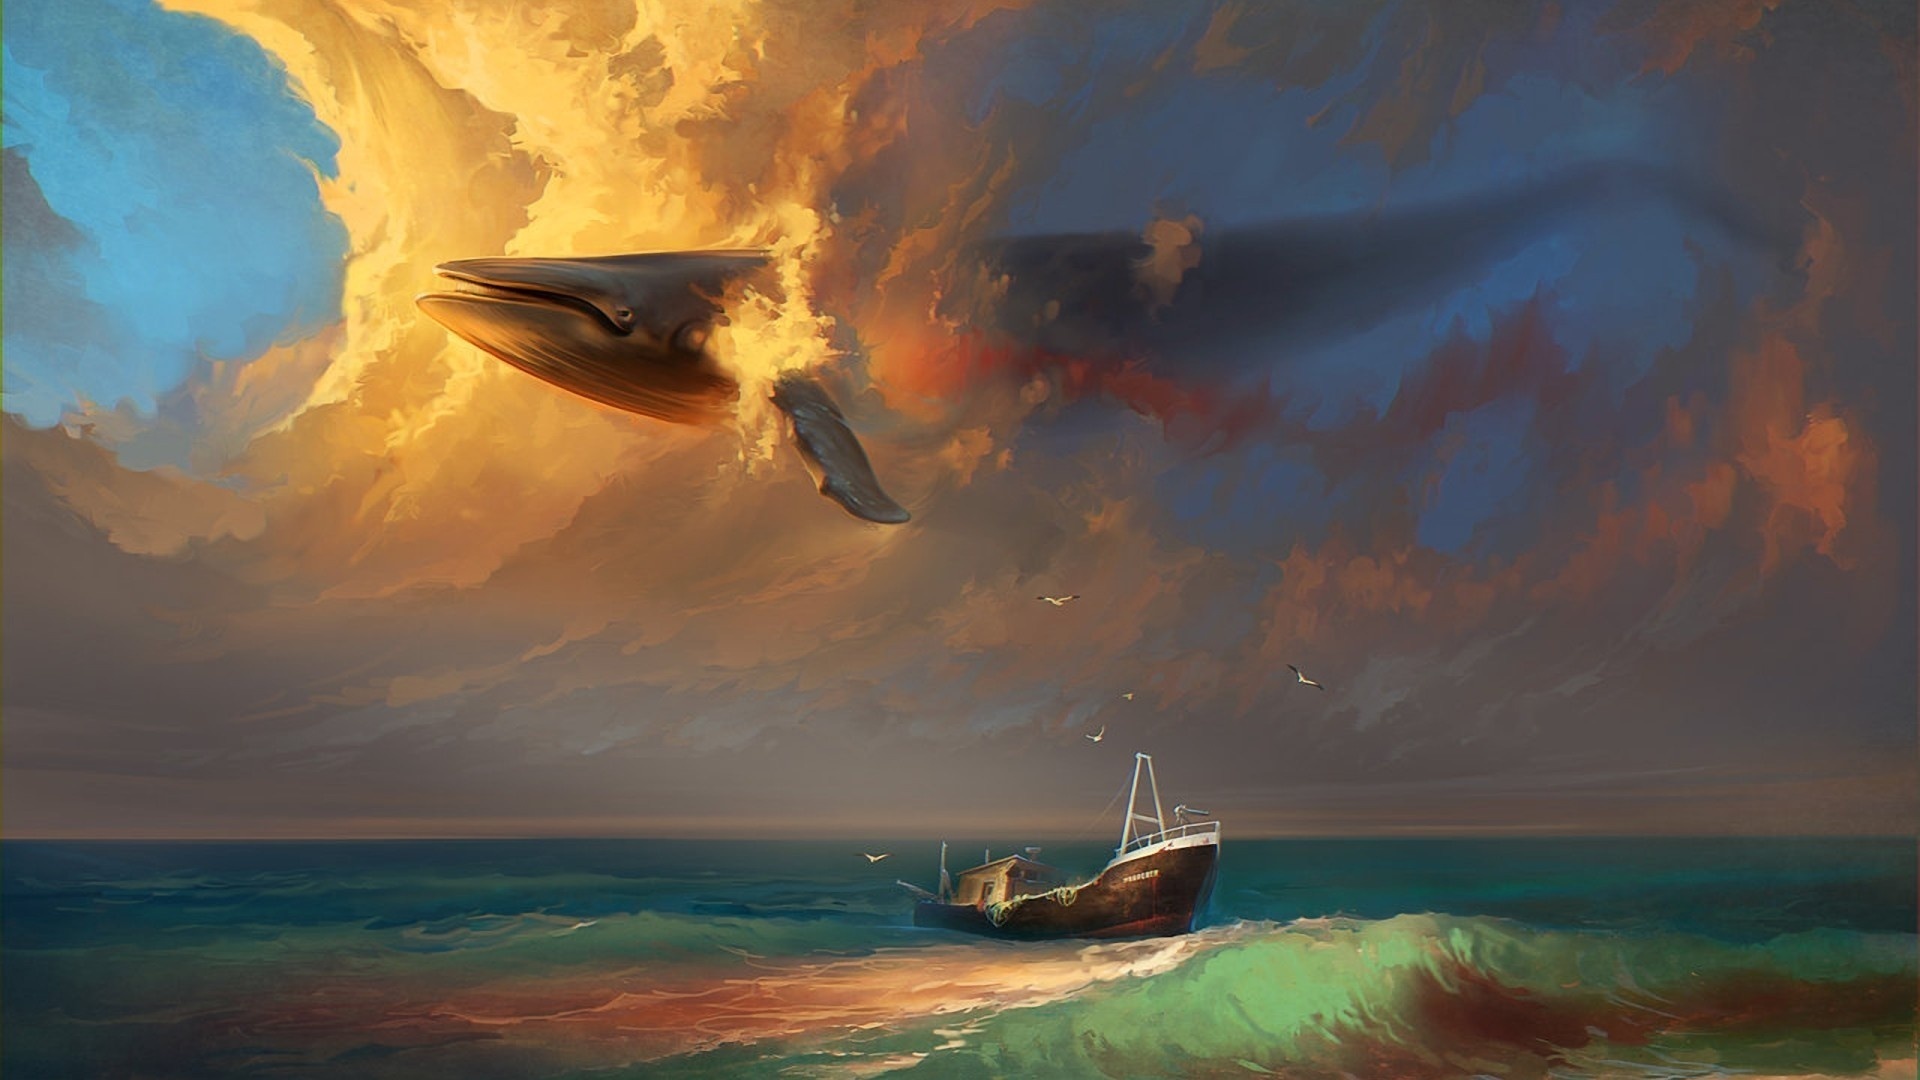 Artistic Psychedelic Surrealism Trippy Surreal Whale Ship Wallpaper